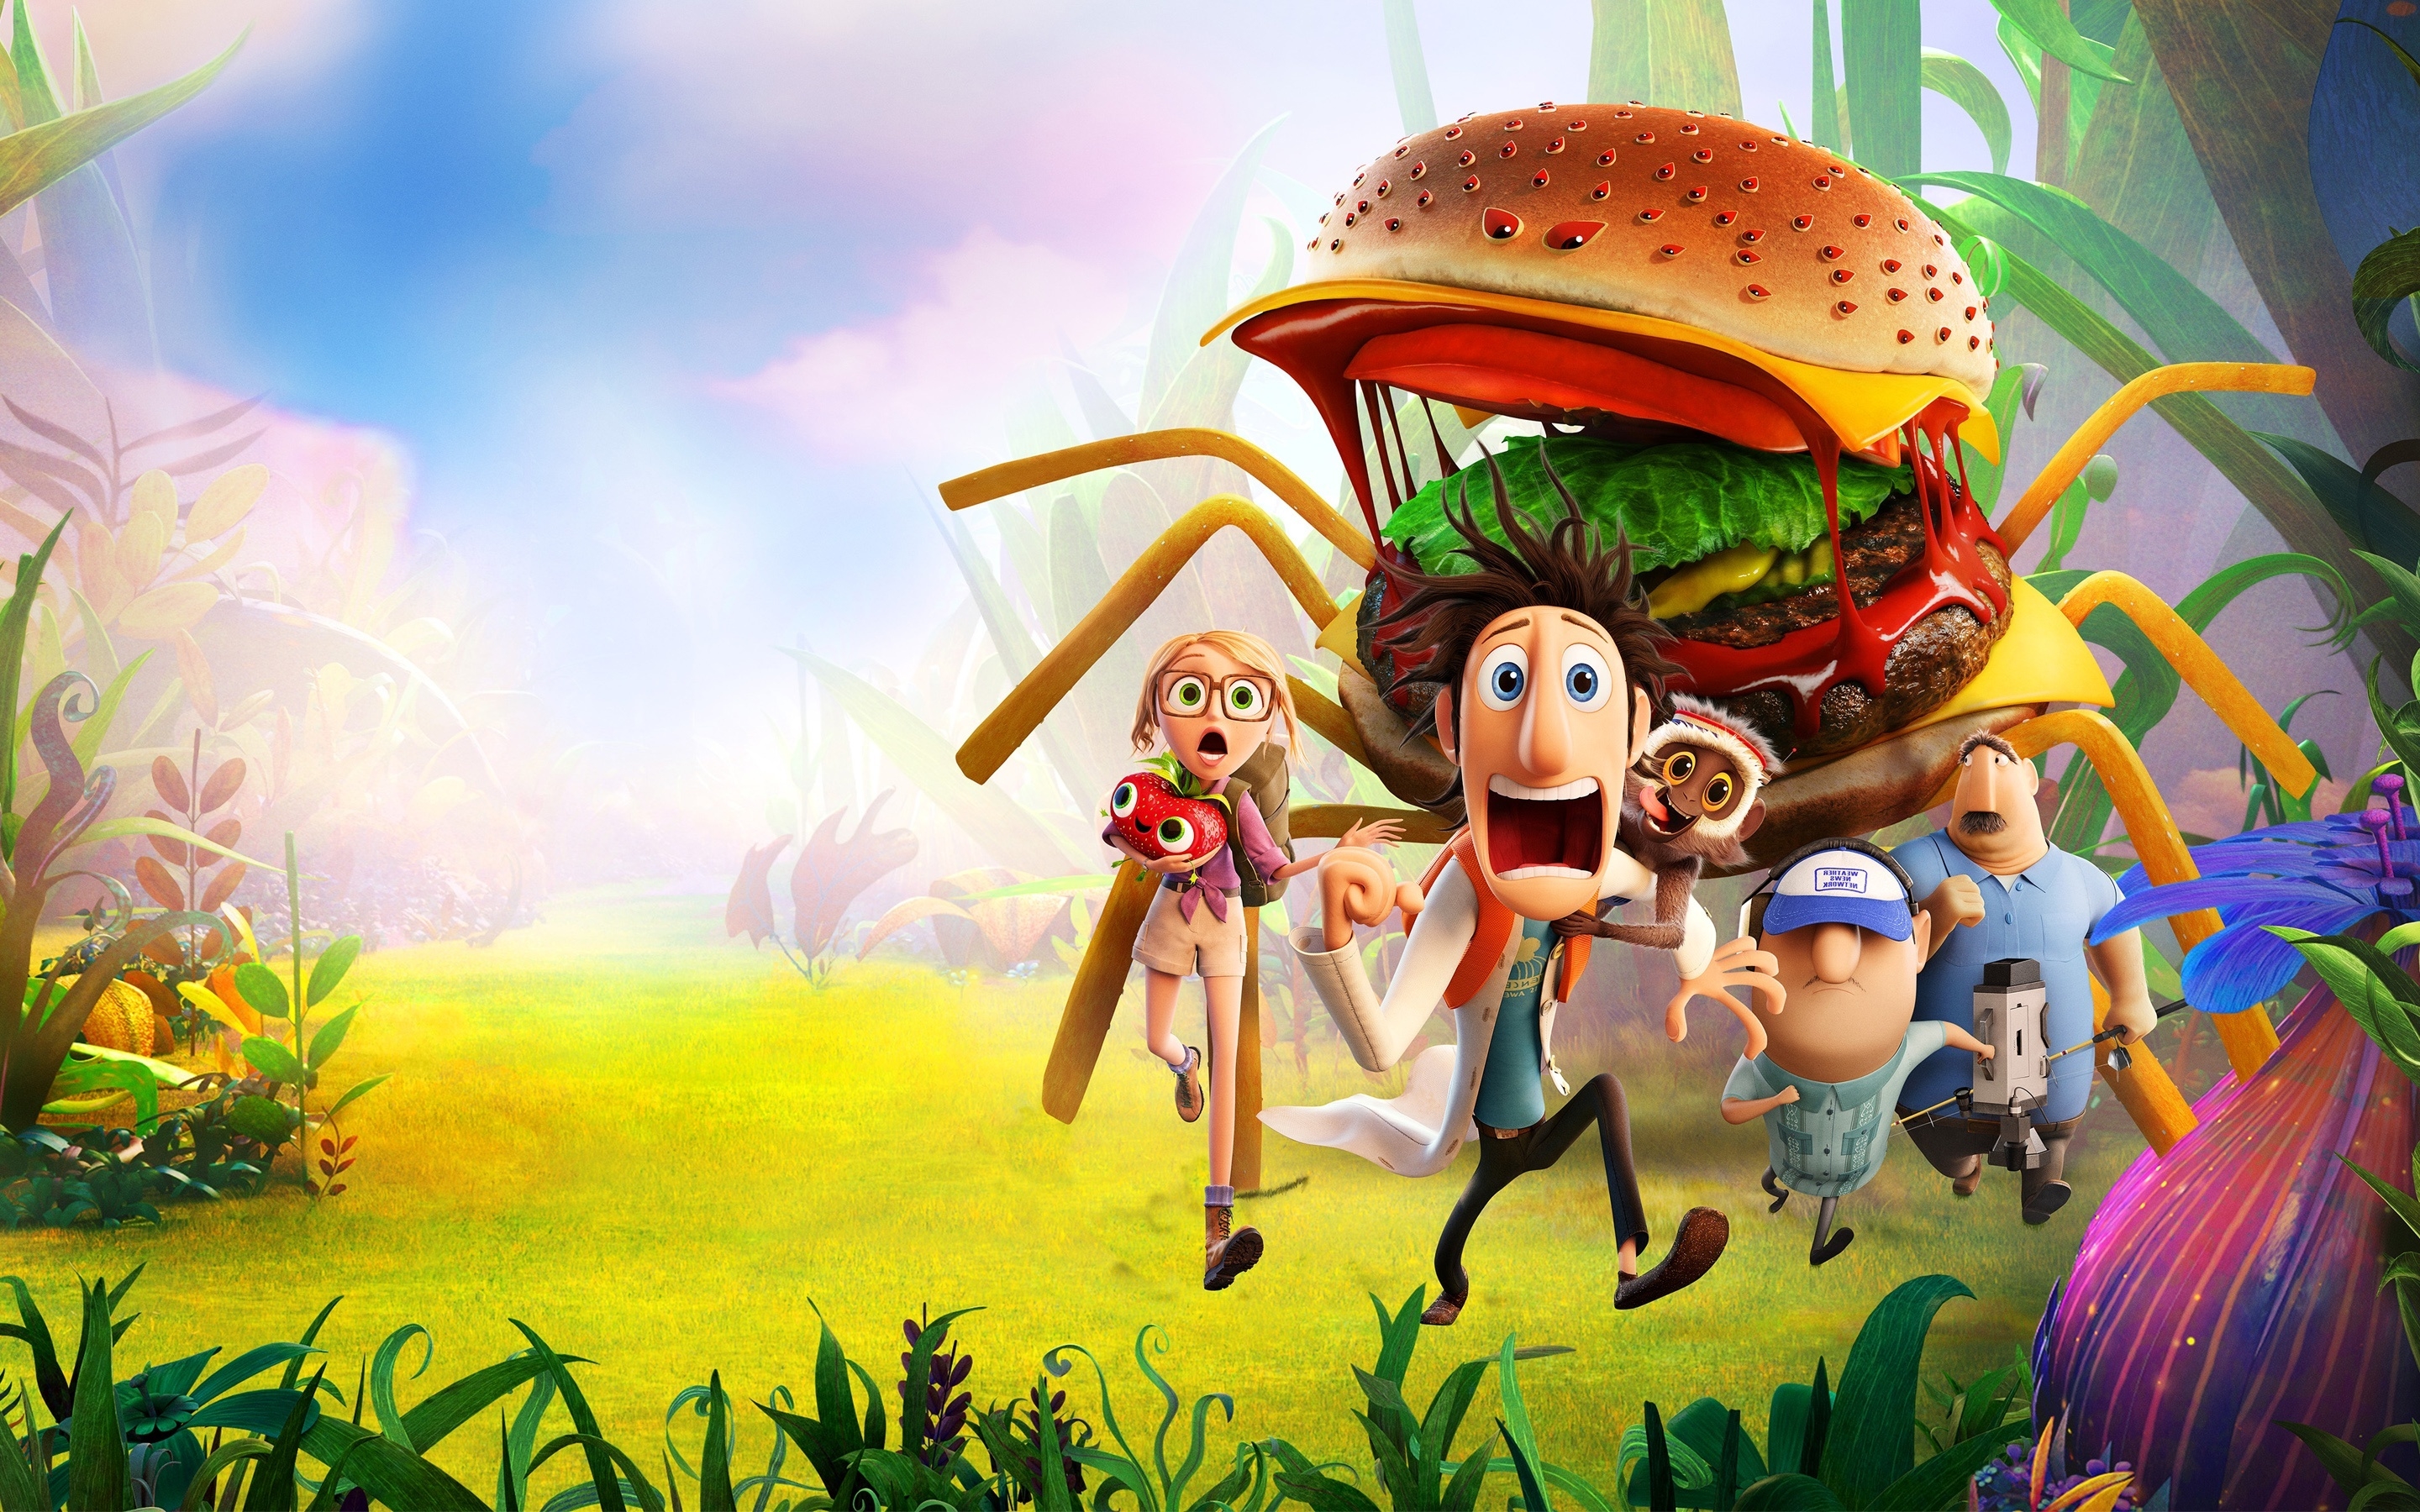 Cloudy with a chance of Meatballs for 2880 x 1800 Retina Display resolution